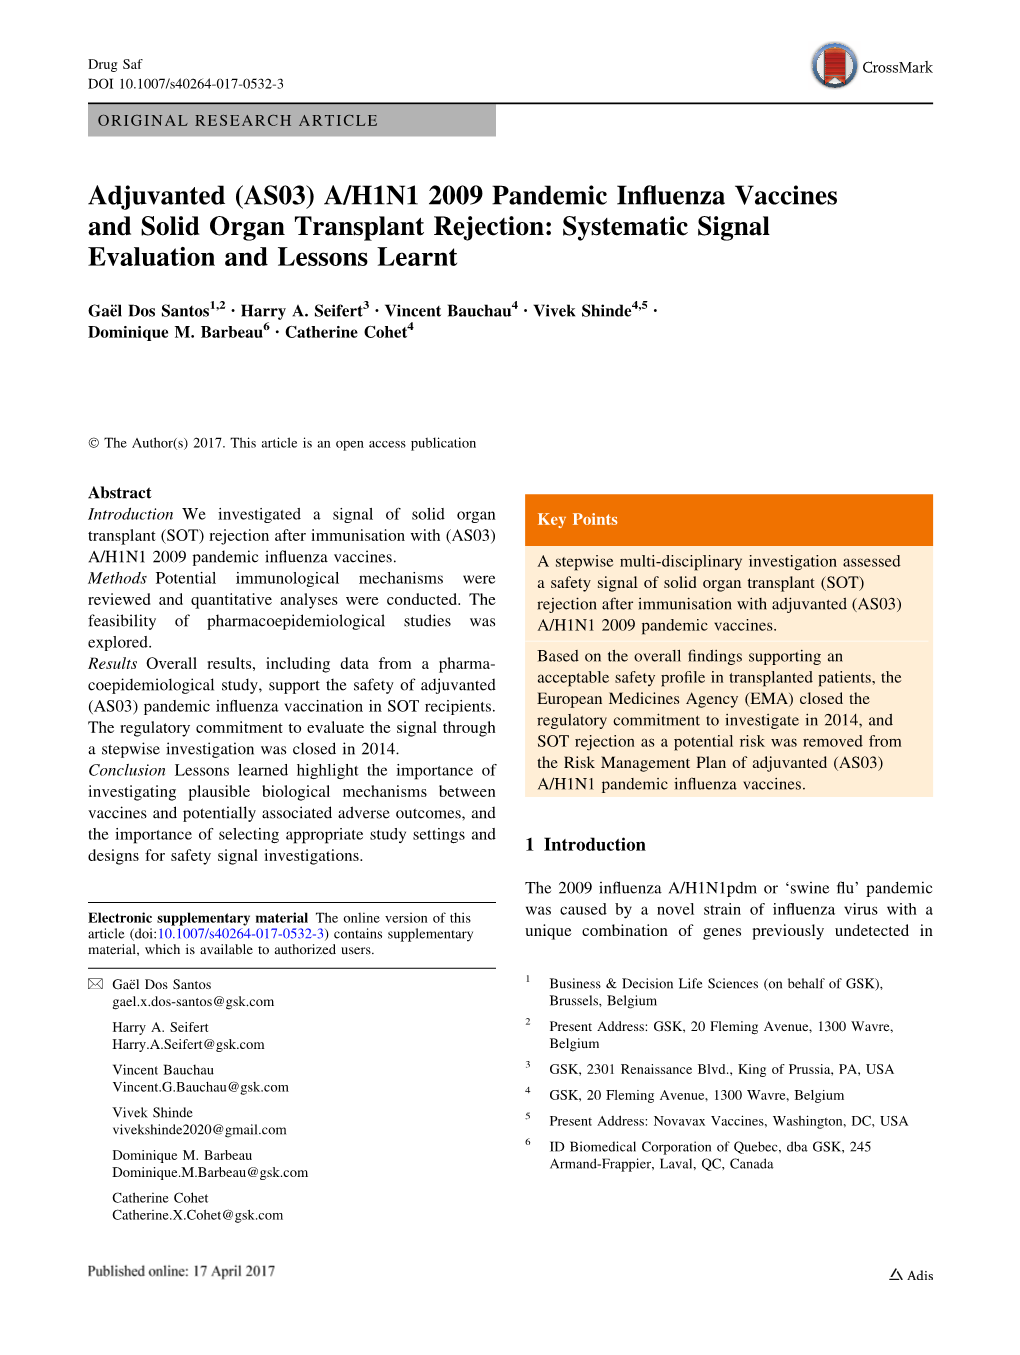 (AS03) A/H1N1 2009 Pandemic Influenza Vaccines and Solid Organ